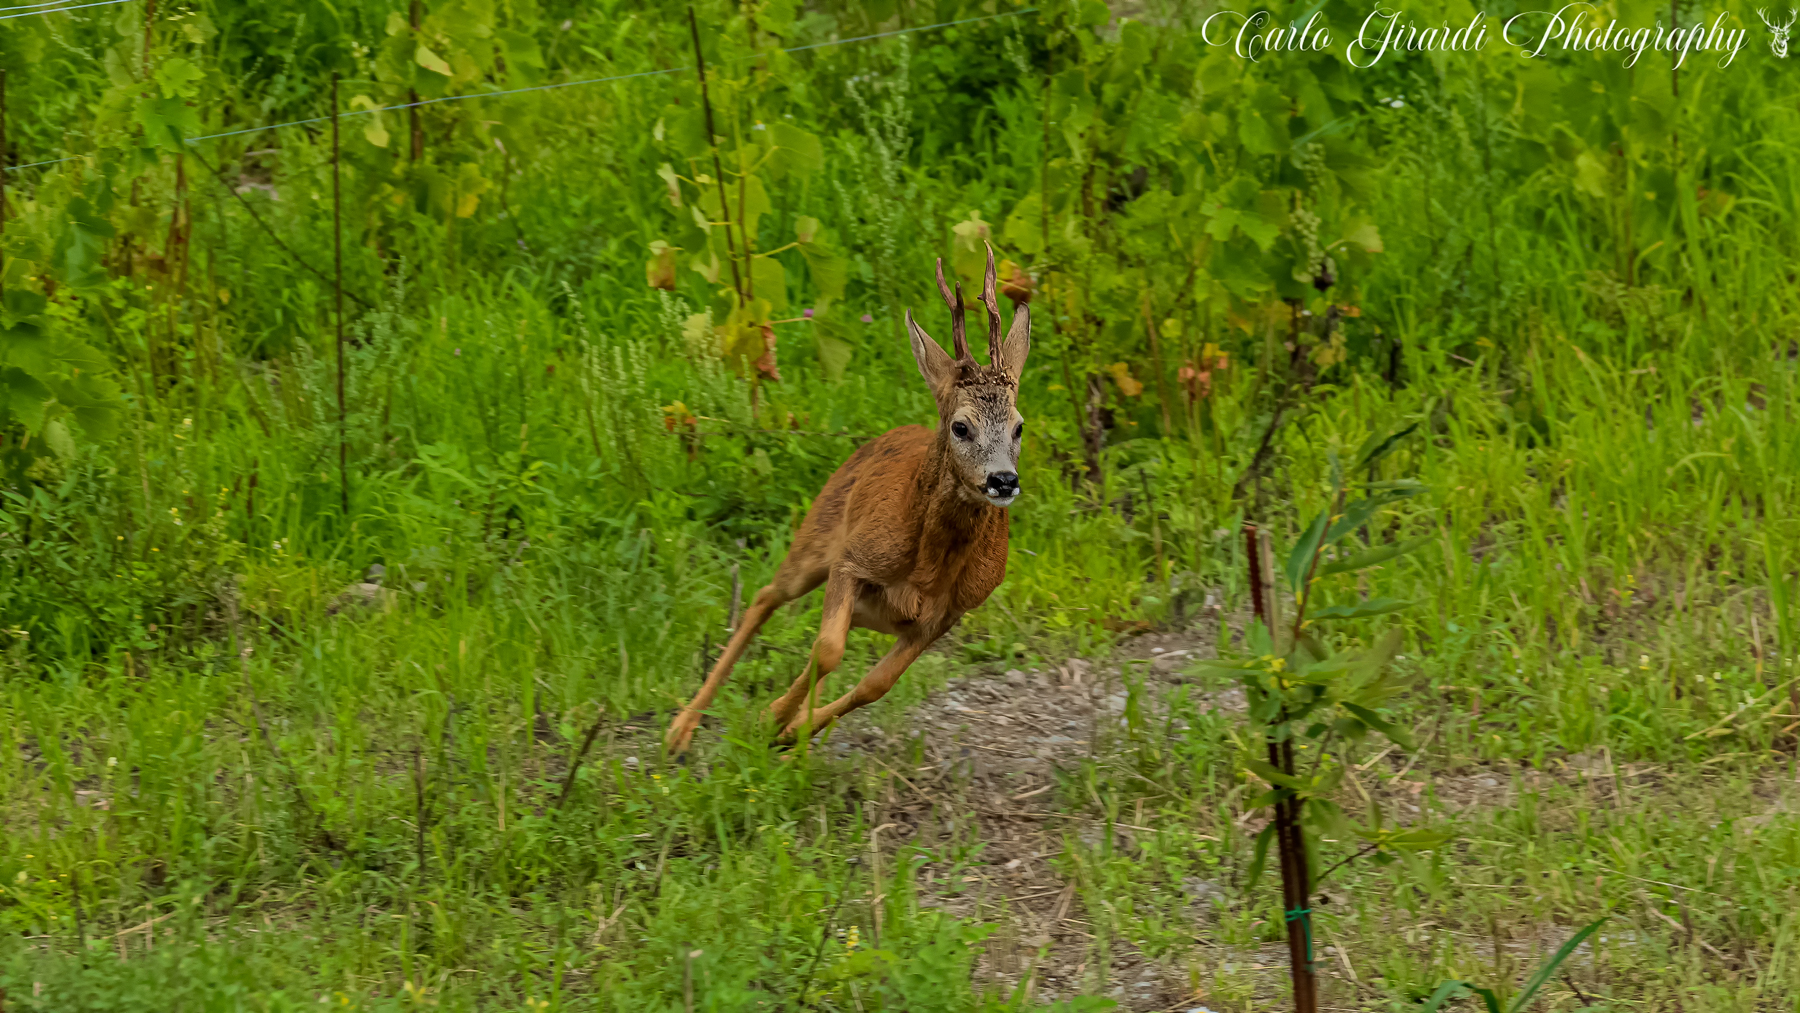 The best defense is the Escape Roe deer...